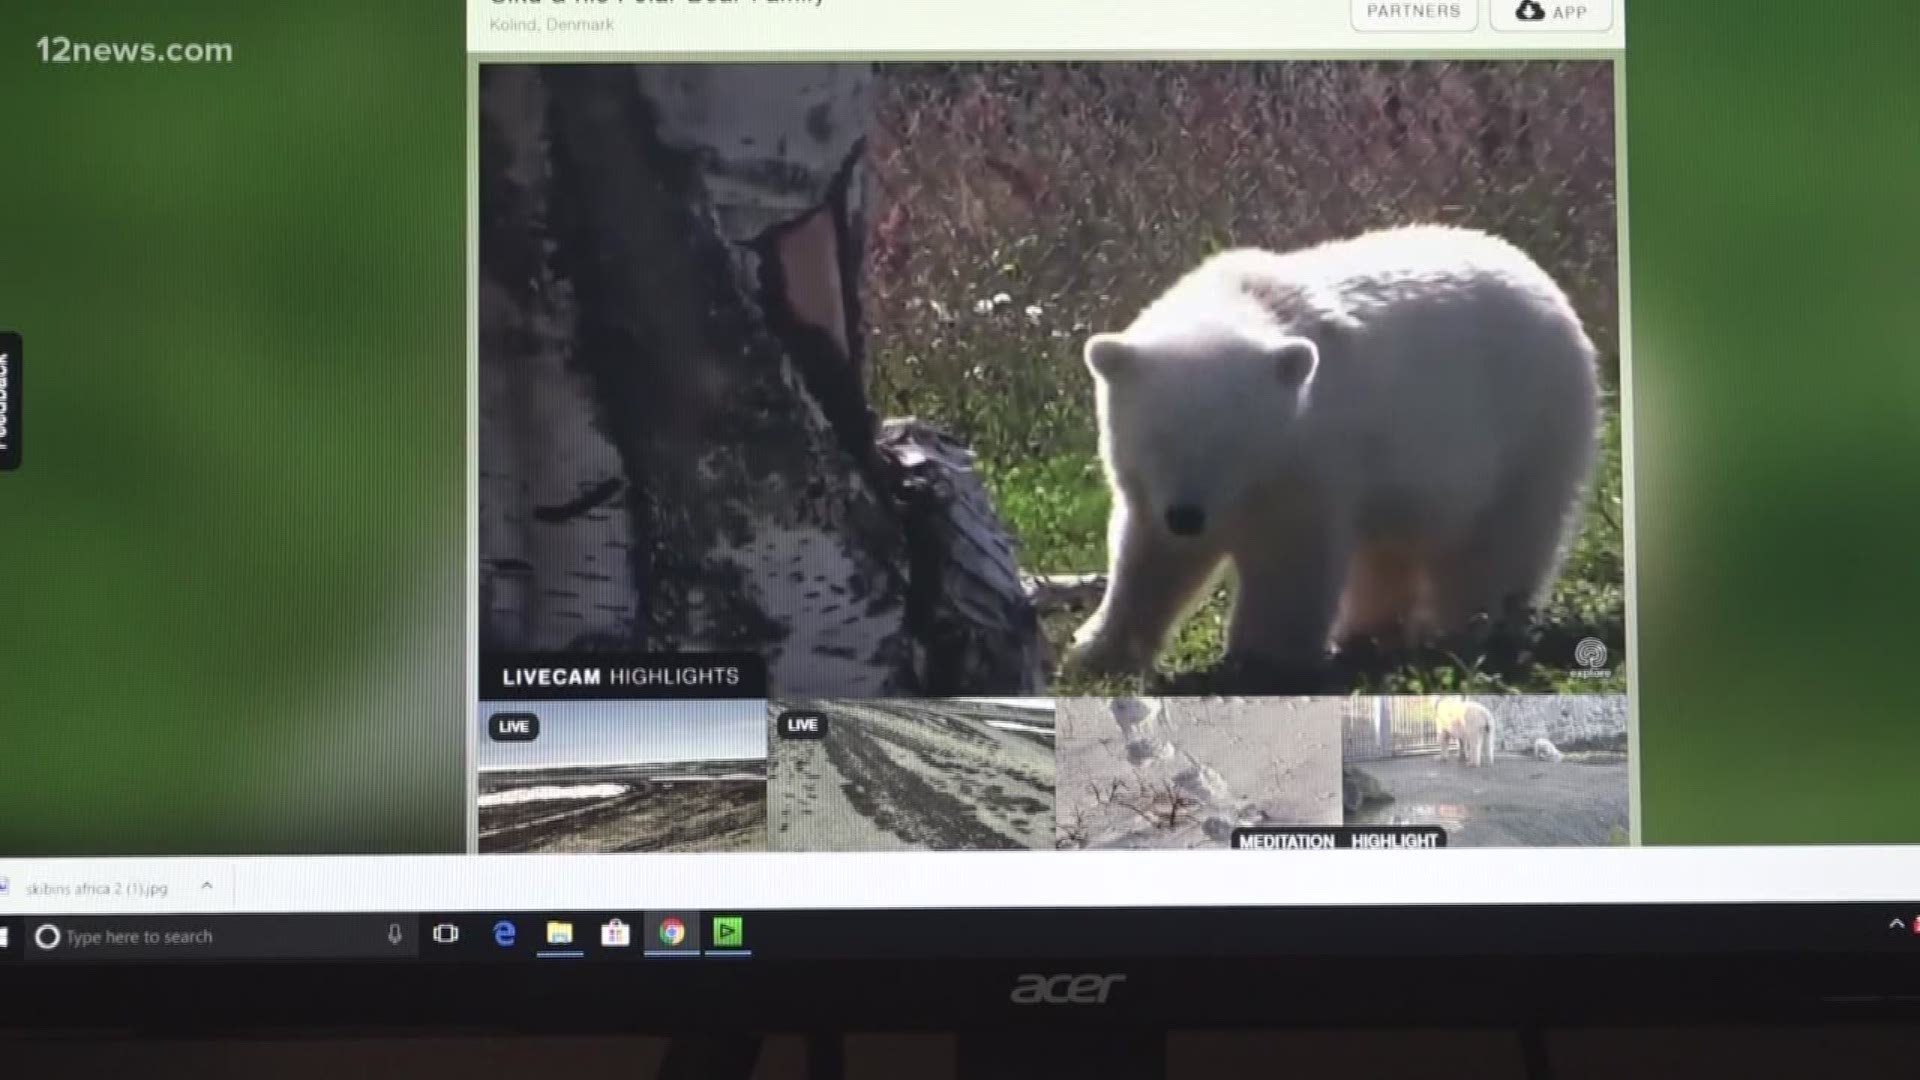 An expert weighs in on why people are so fascinated by live animal cameras.